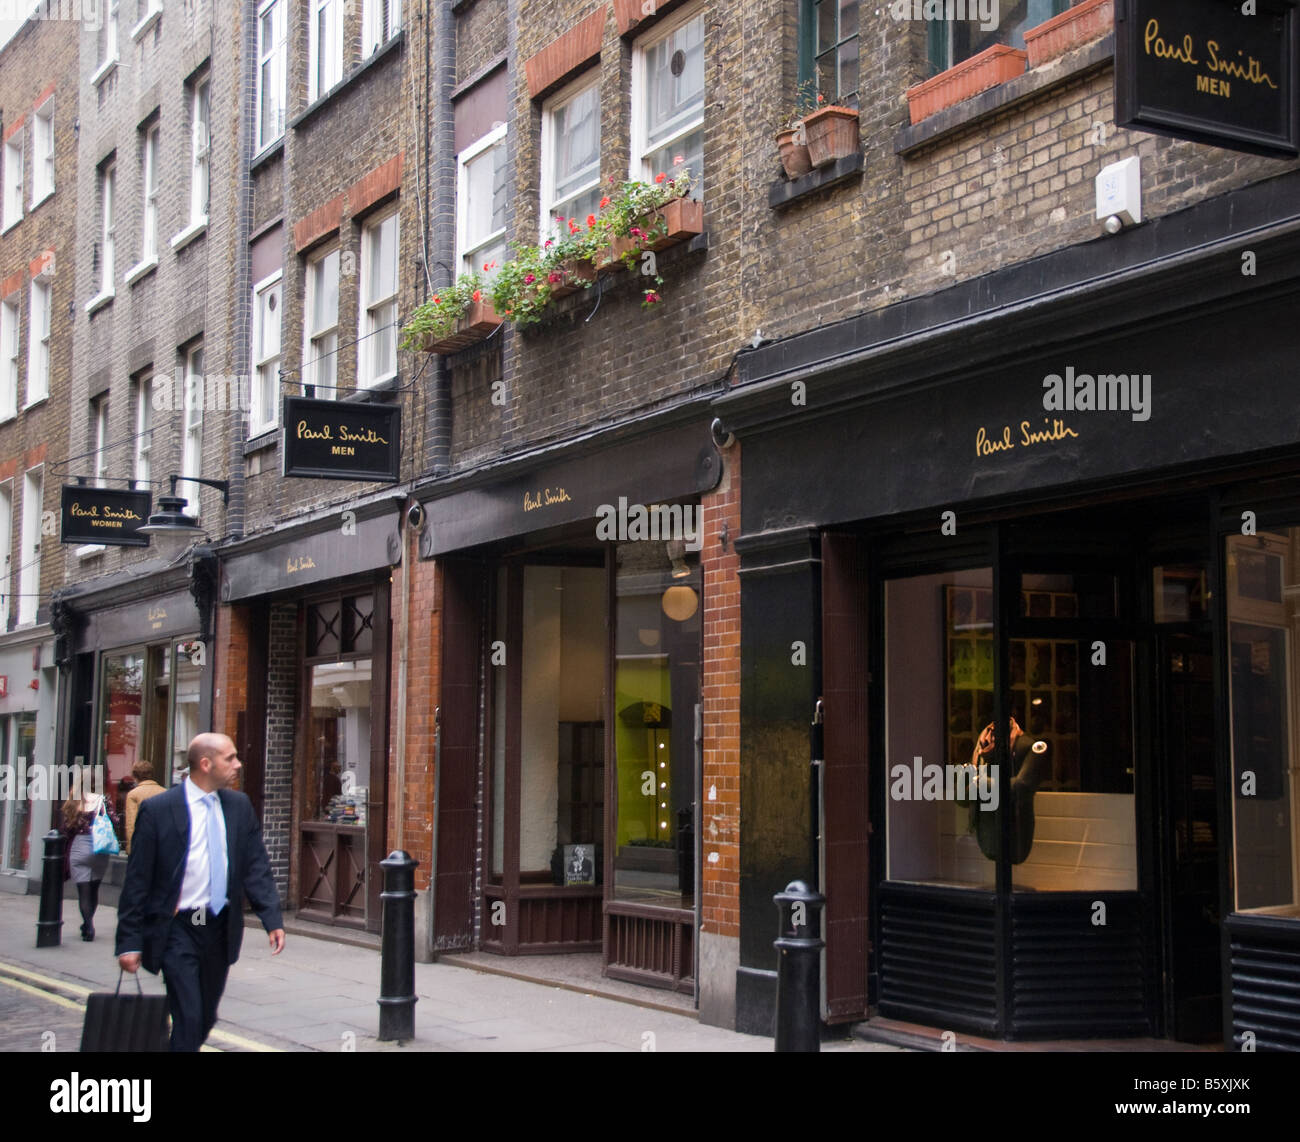 Paul Smith shops in Floral Street London Stock Photo - Alamy